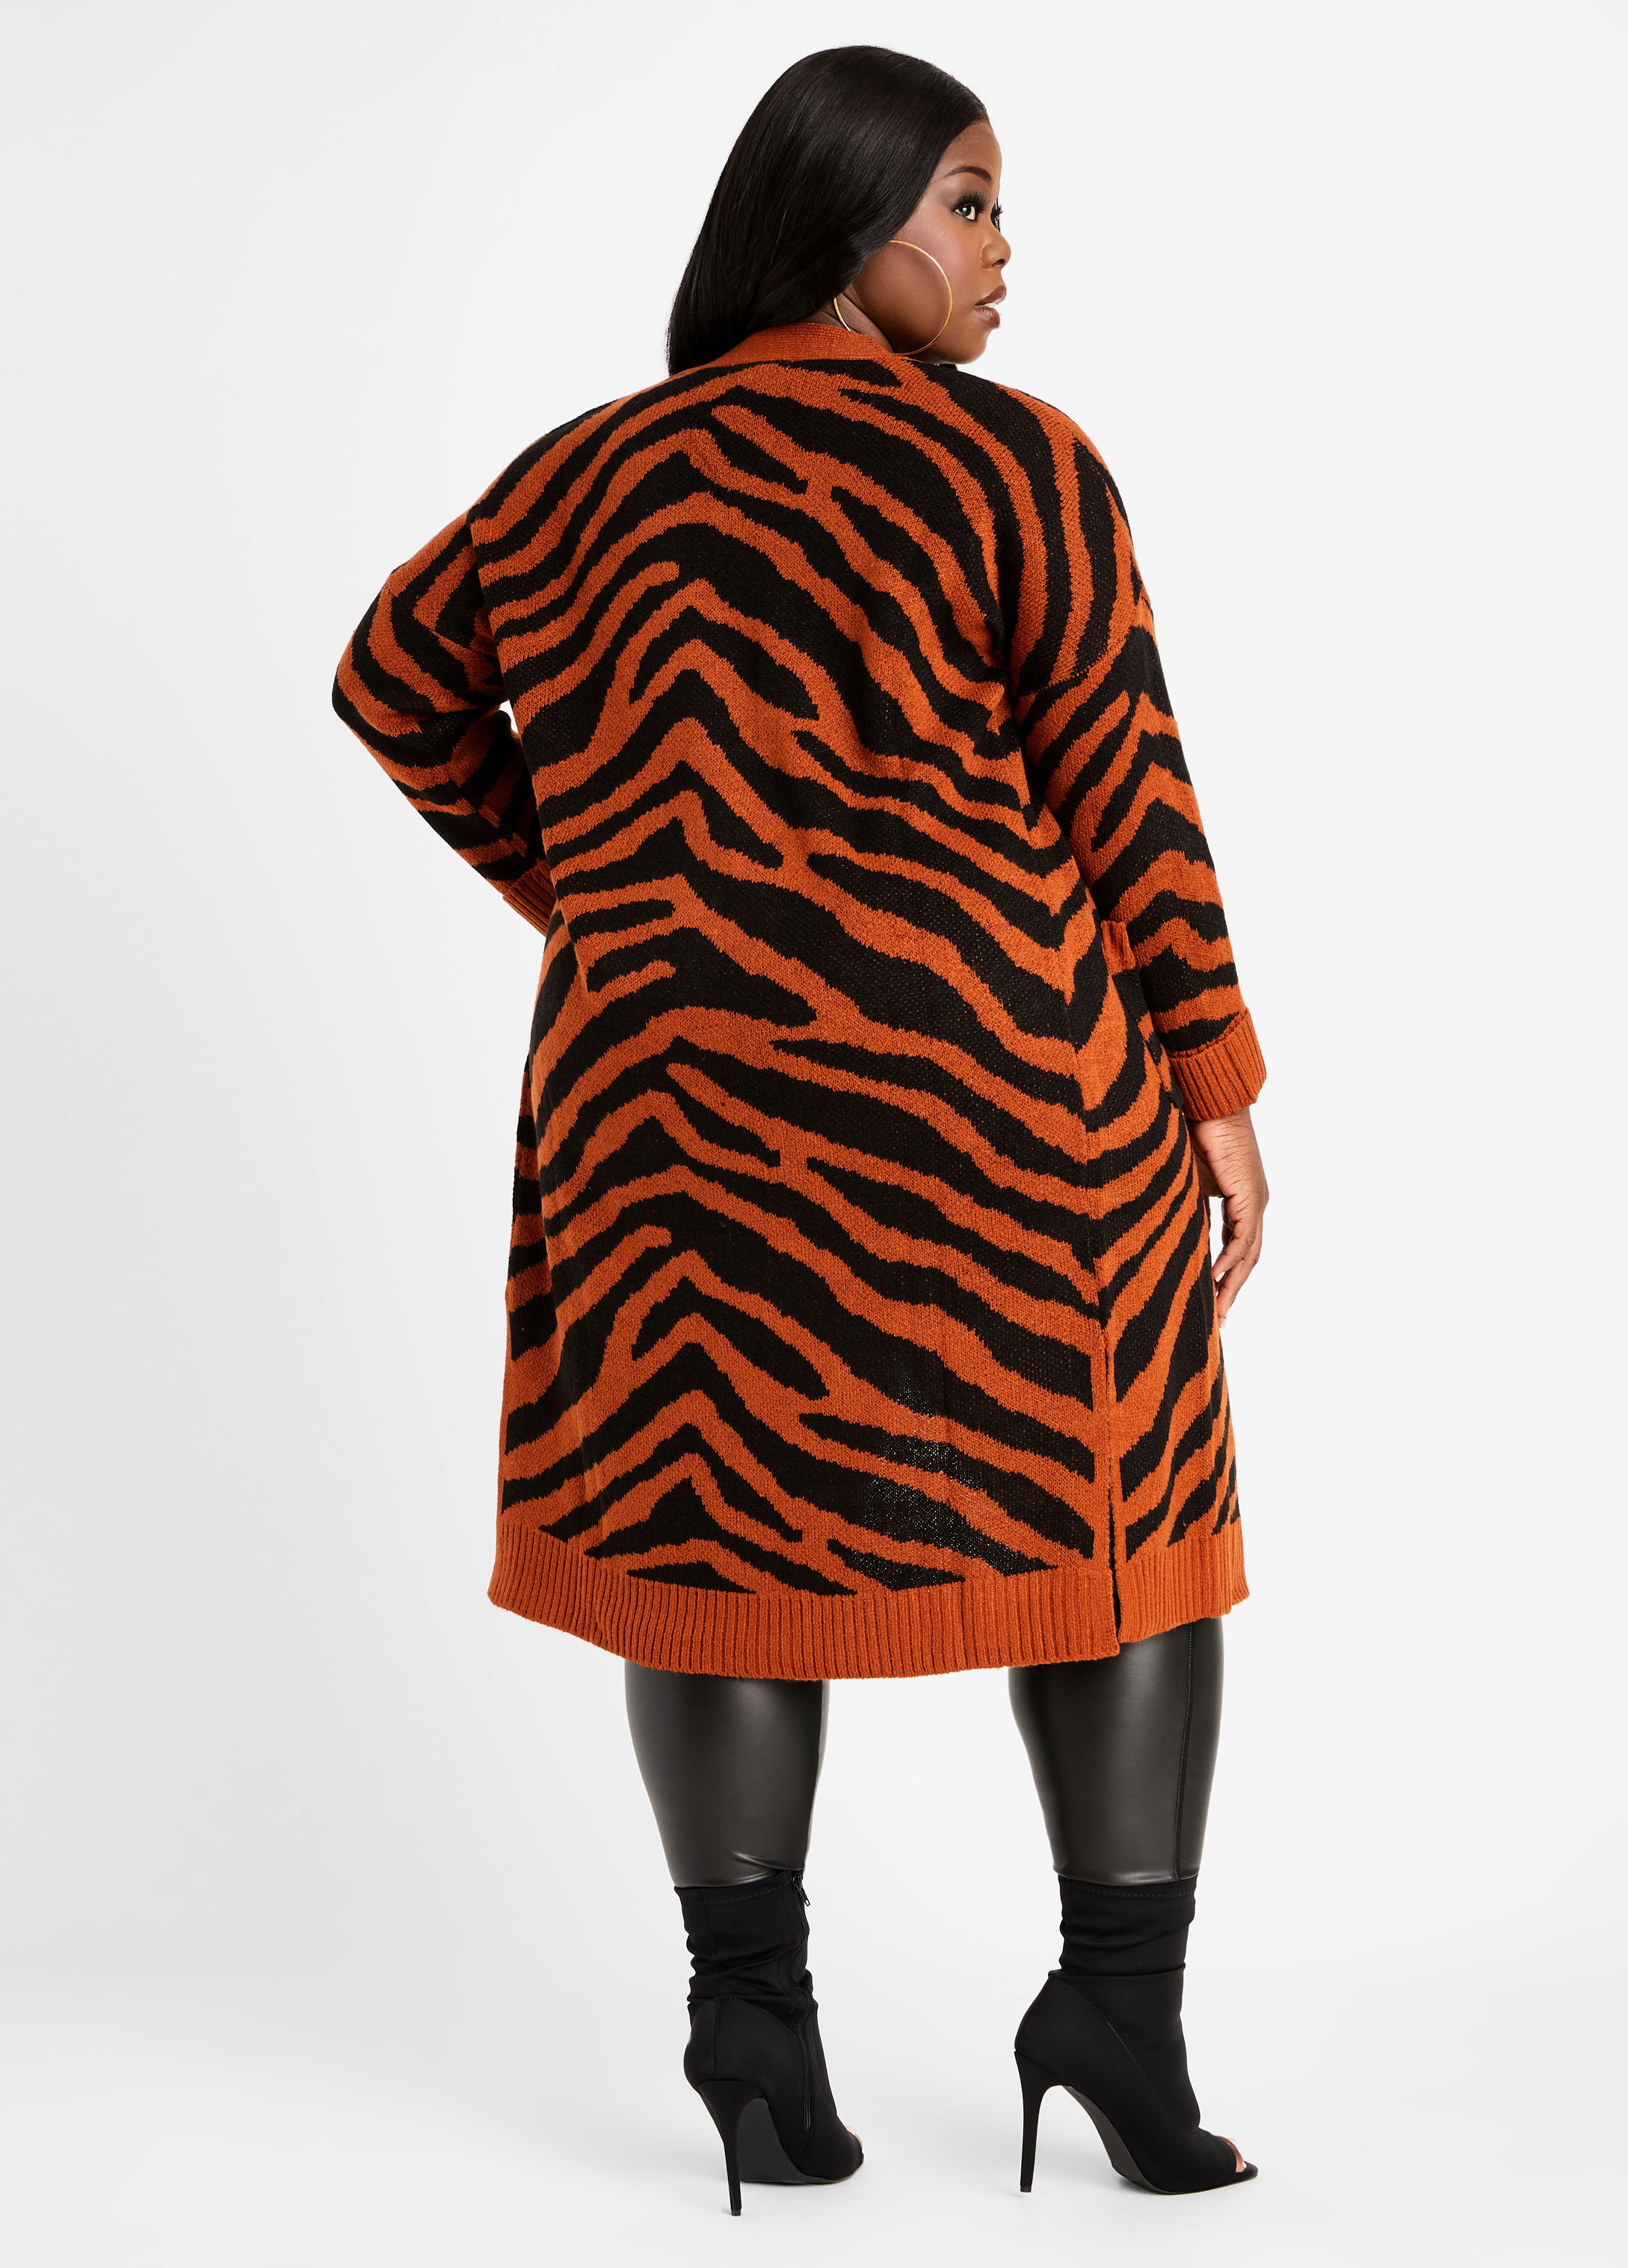 Women's Plus Size Lightweight Zebra Stripe Duster Cardigan. (6 Pack) • Long  sleeves • Open front design • Two stylish side pockets • Zebra striped  print • Soft and comfortable • Duster